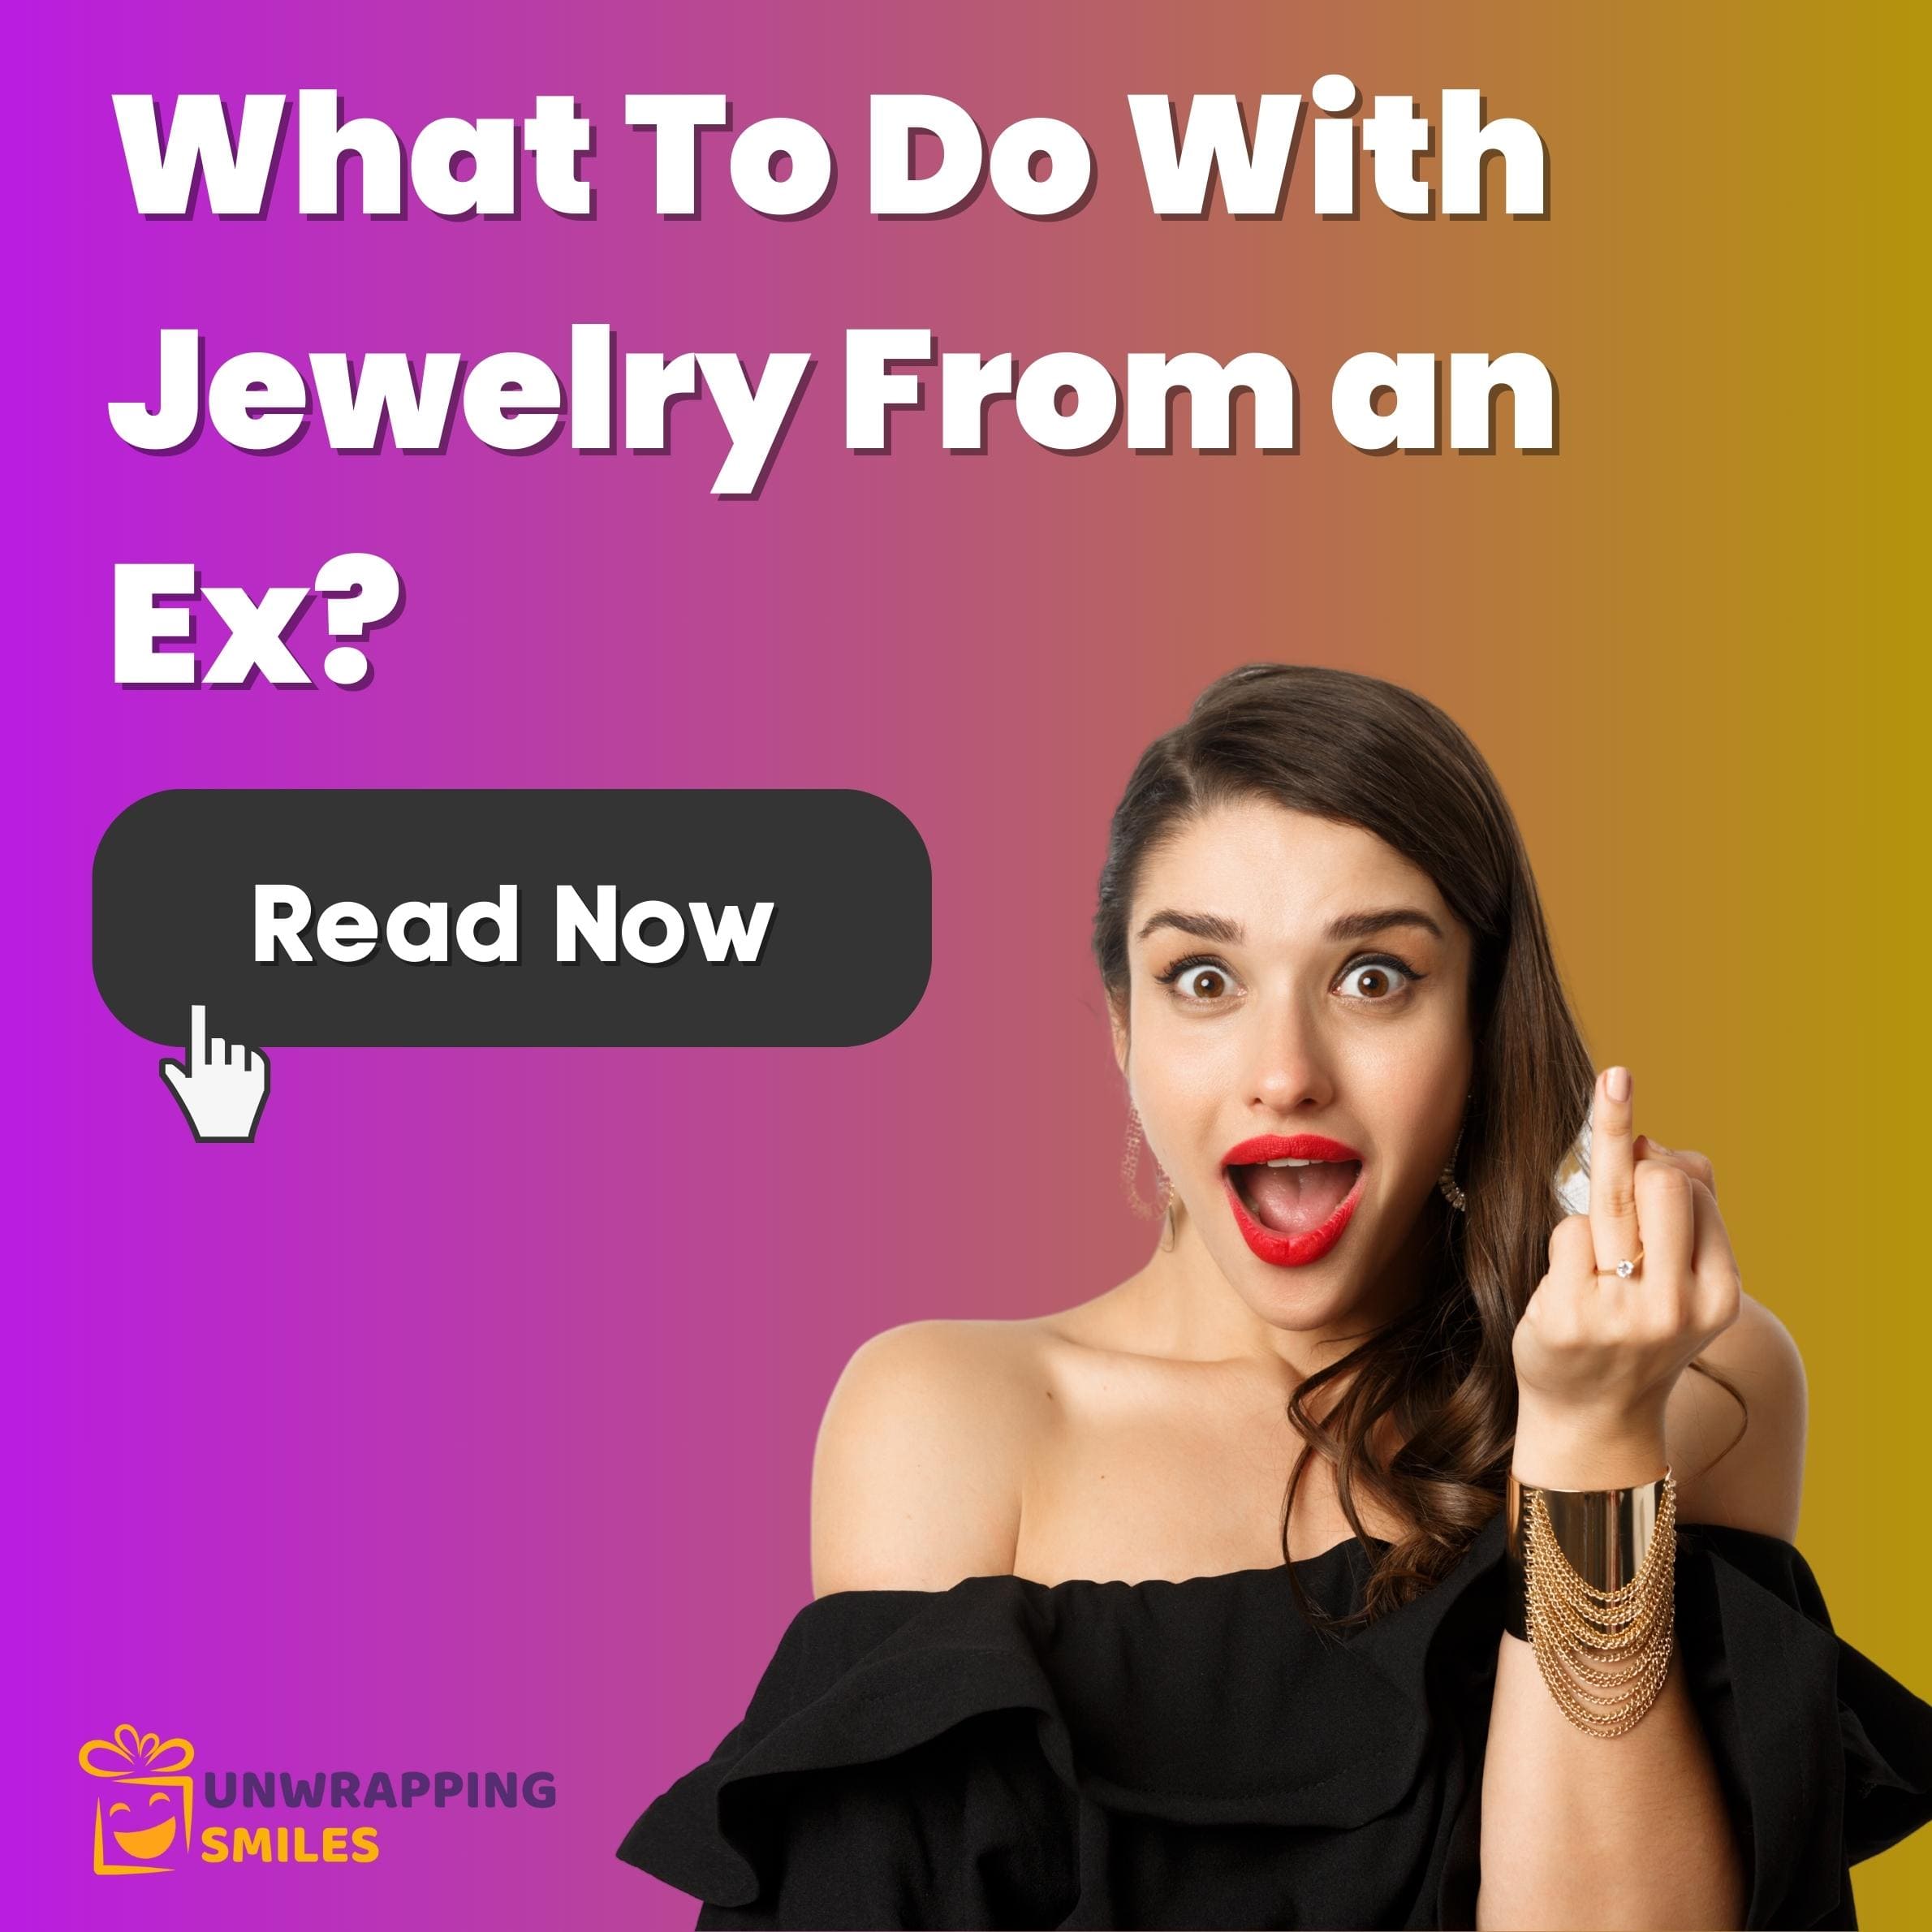 What To Do With The Jewelry From an Ex